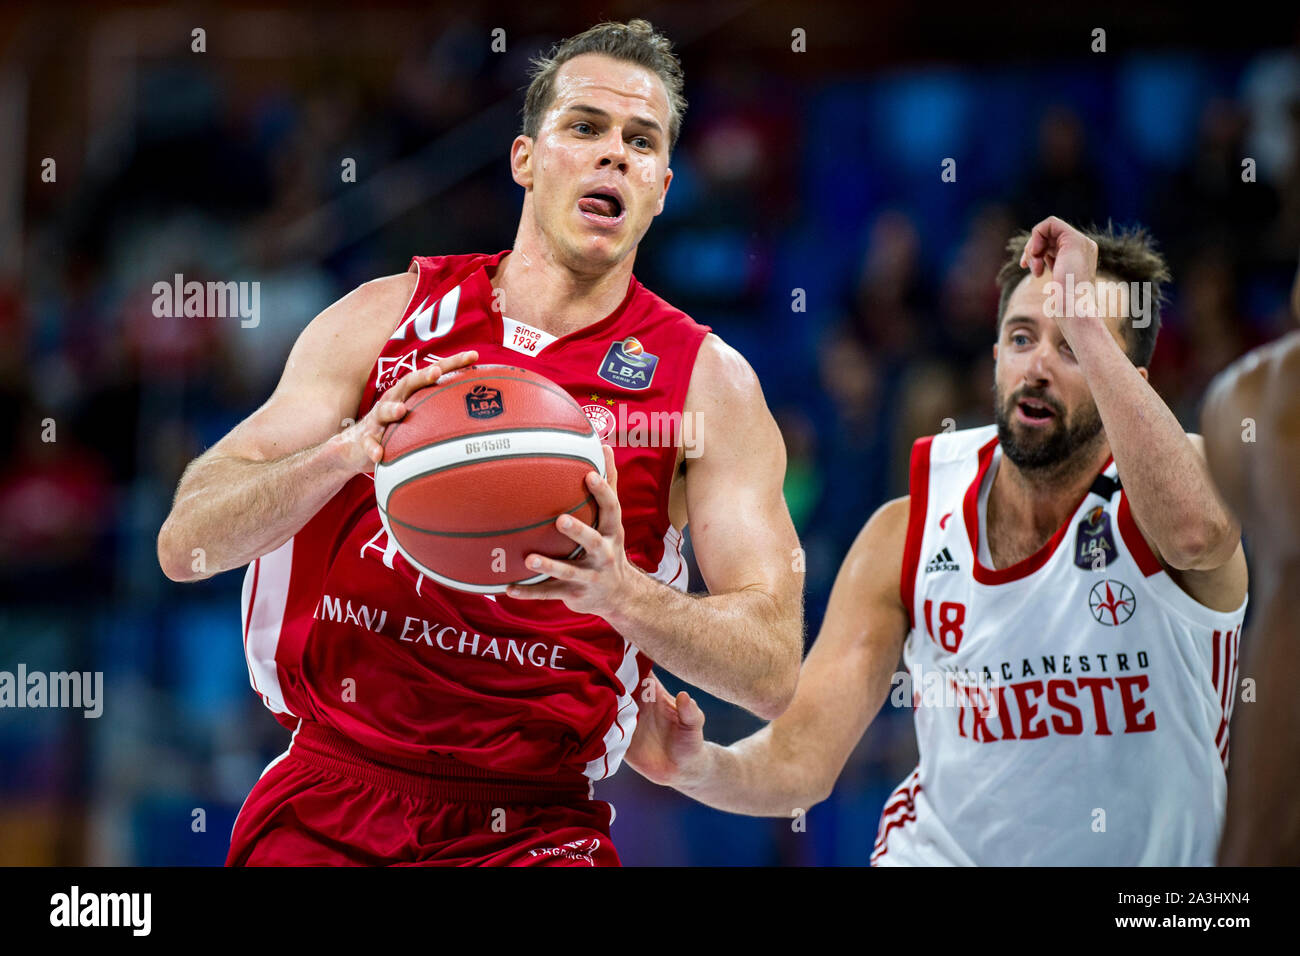 Milano, Italy. 06th Oct, 2019. Michael Roll (AX Armani Exchange Olimpia Milano) during Legabasket Serie A basketball match AX Armani Exchange Olimpia Milano vs Pallacanestro Trieste in Milano, Palalido Allianz Cloud, the home team won 88-74. Italy 6th October 2019. (Photo by Matteo Cogliati/Pacific Press) Credit: Pacific Press Agency/Alamy Live News Stock Photo